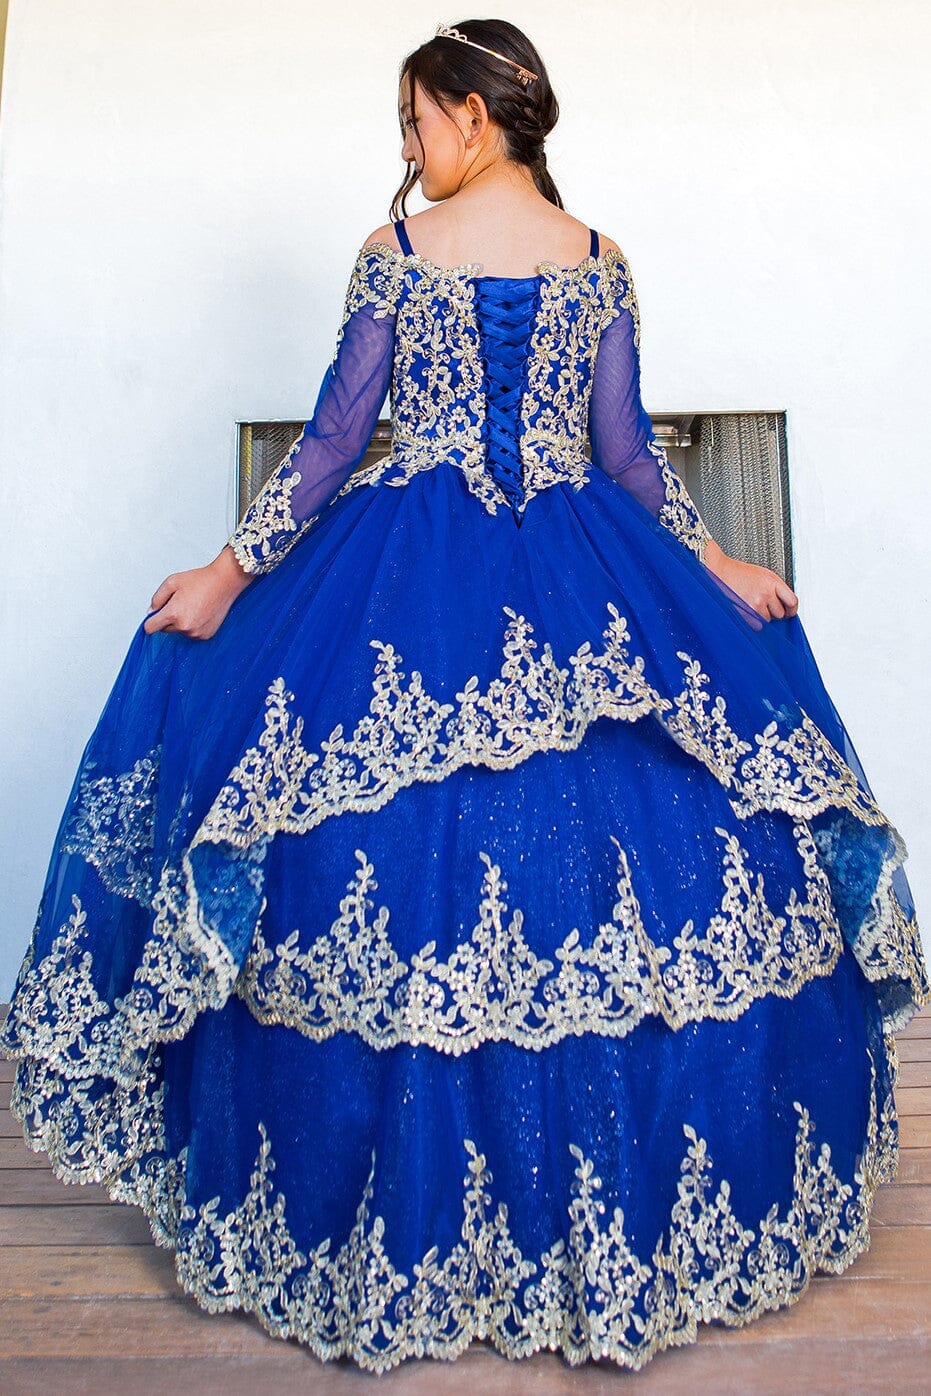 Girls Applique Long Sleeve Gown by Cinderella Couture 8059